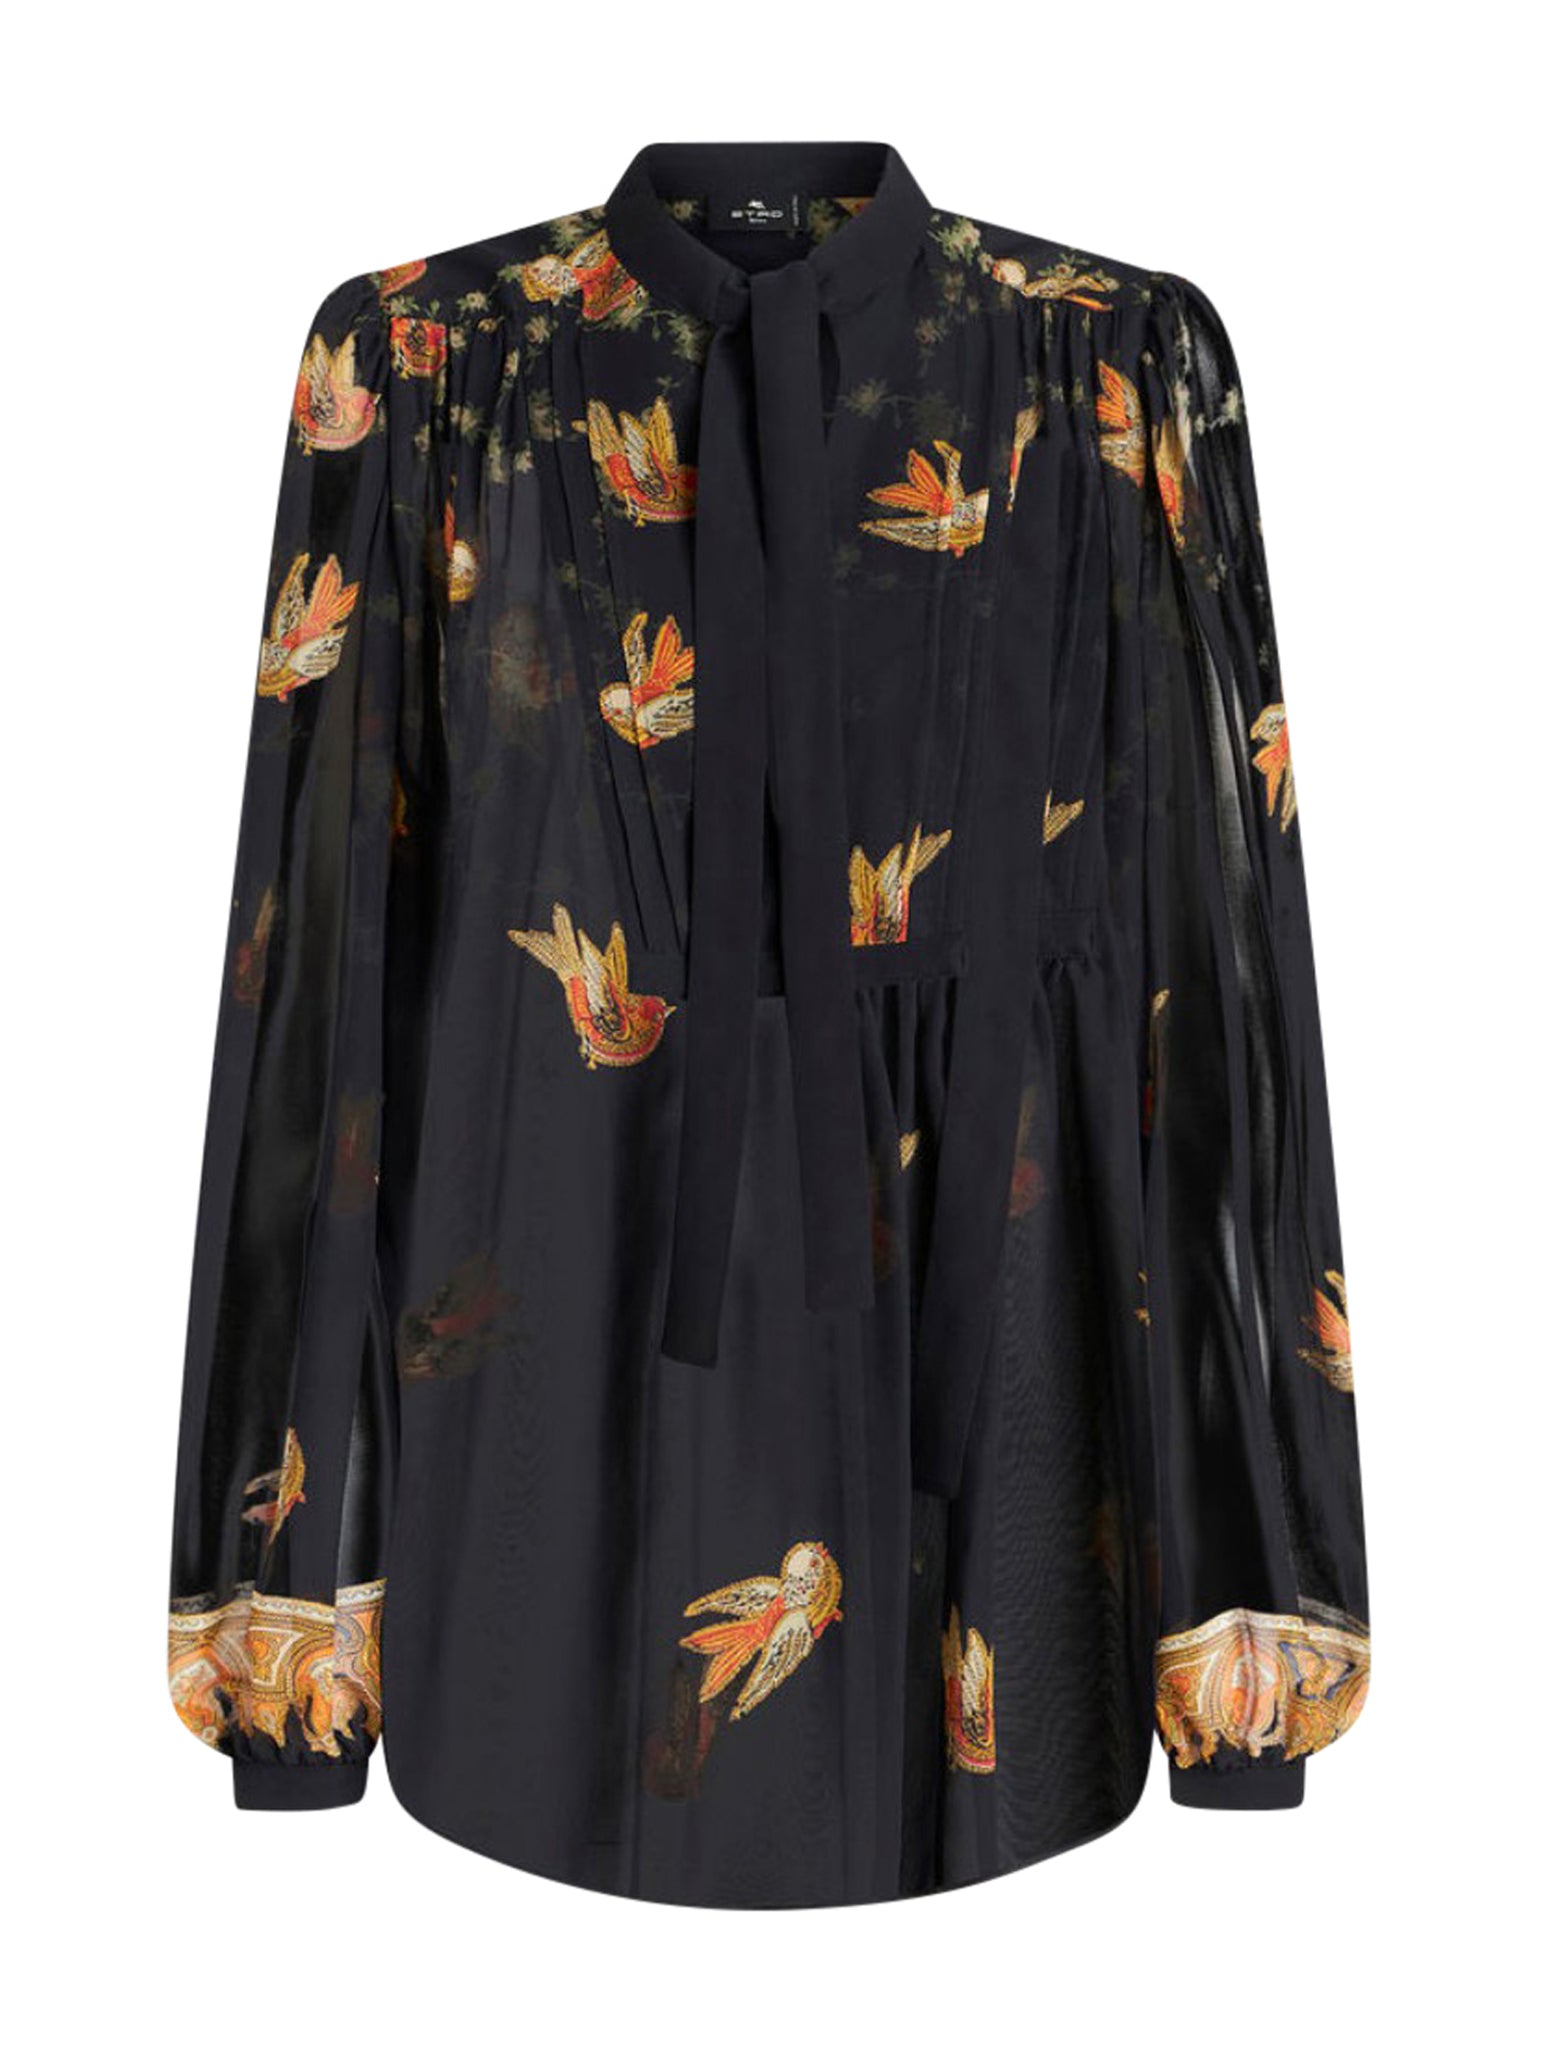 GEORGETTE TOP WITH PRINTED BIRDS